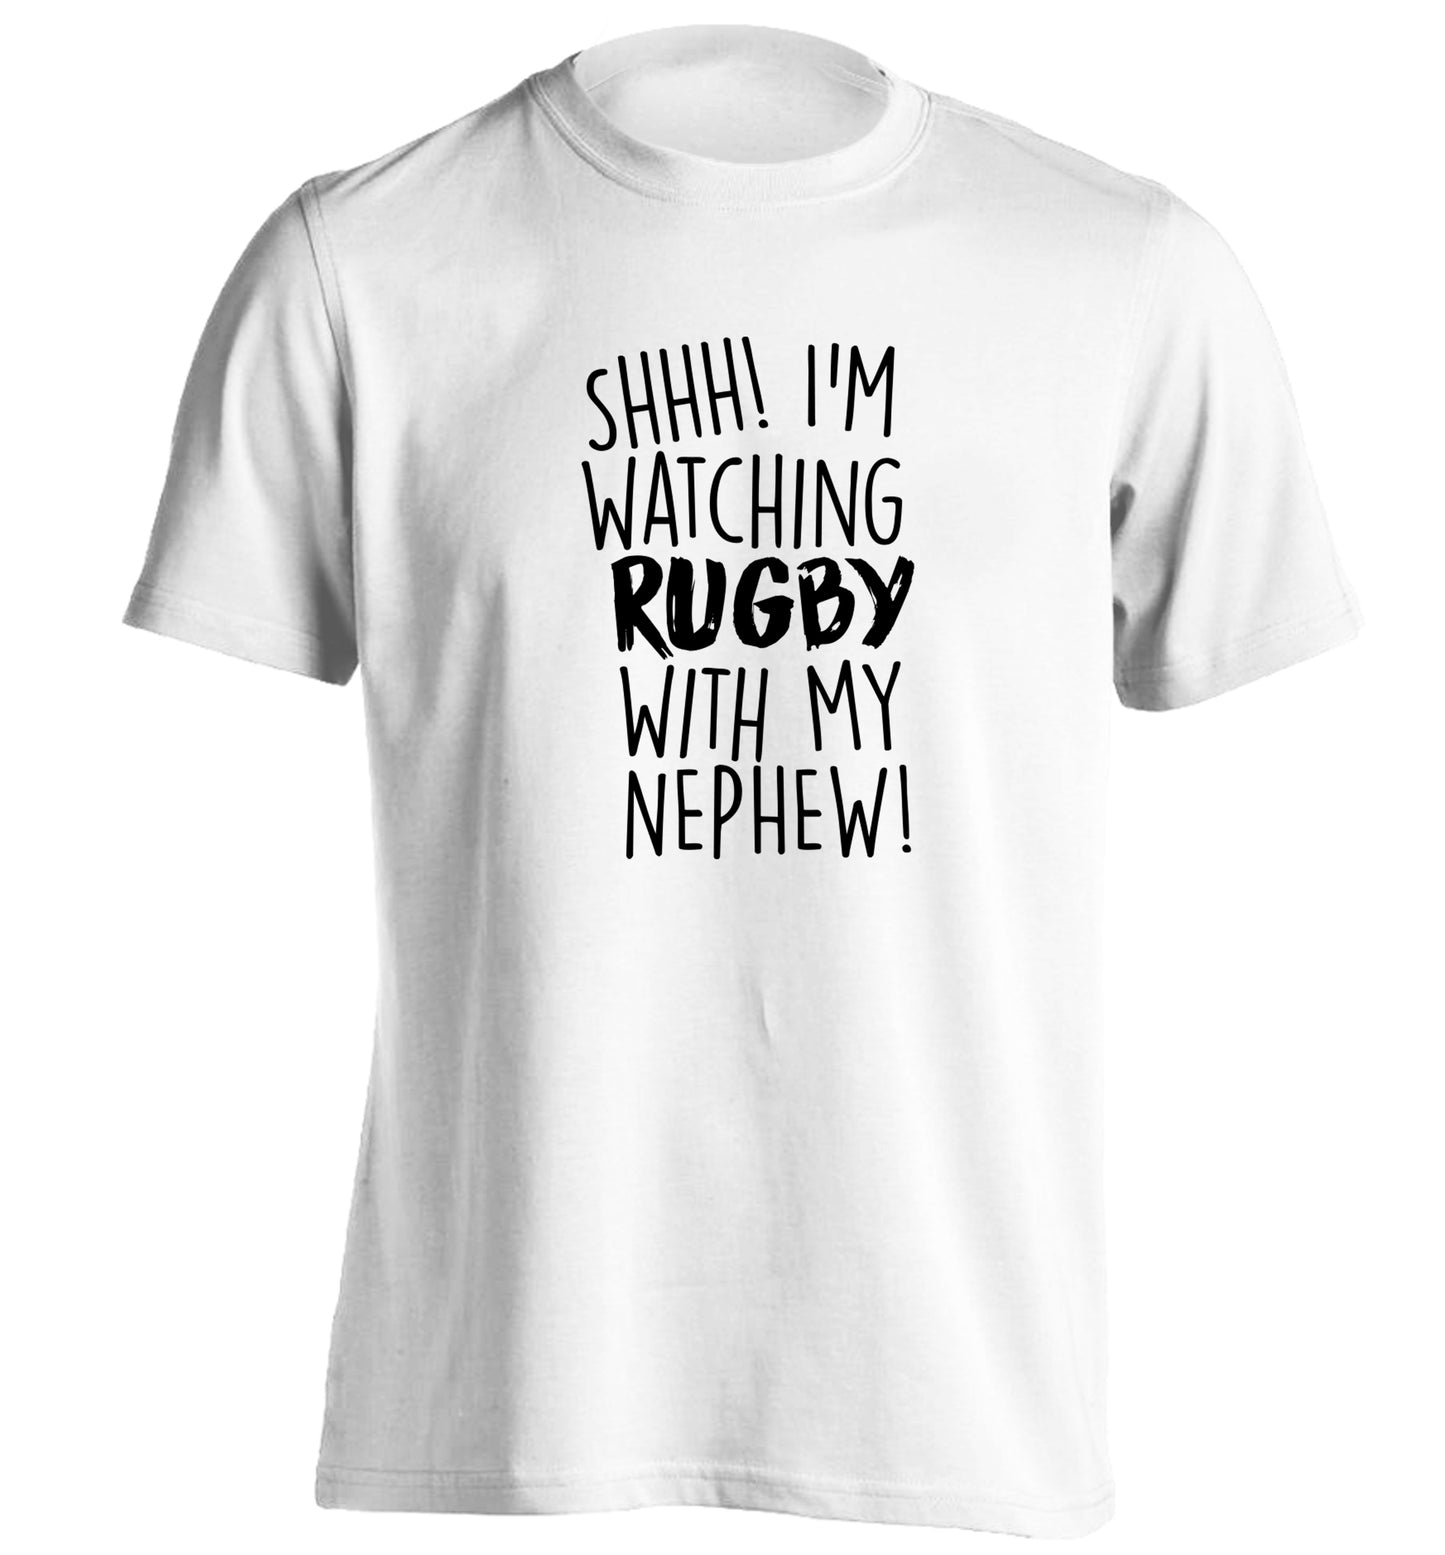 Shh.. I'm watching rugby with my nephew adults unisex white Tshirt 2XL